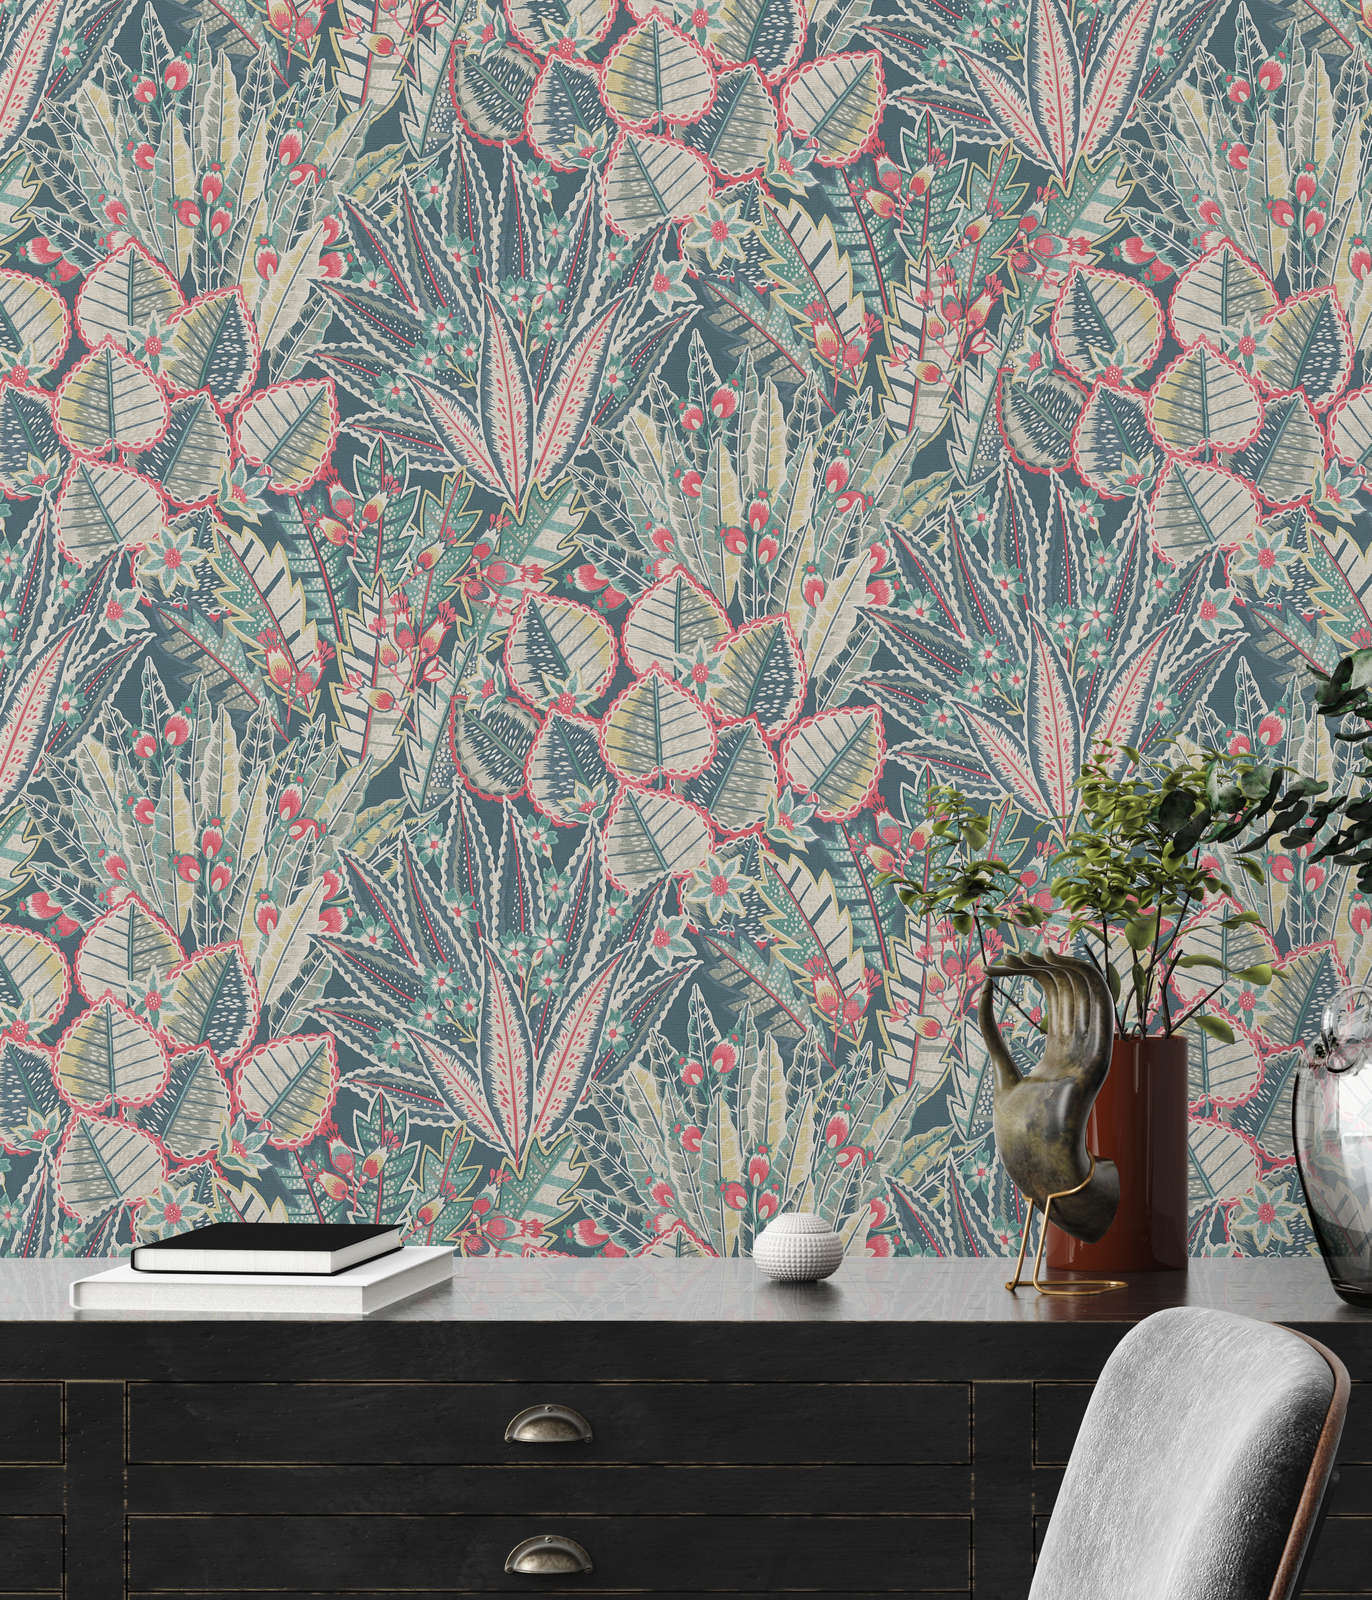             Non-woven wallpaper with leaf pattern in jungle look - blue, green, red
        